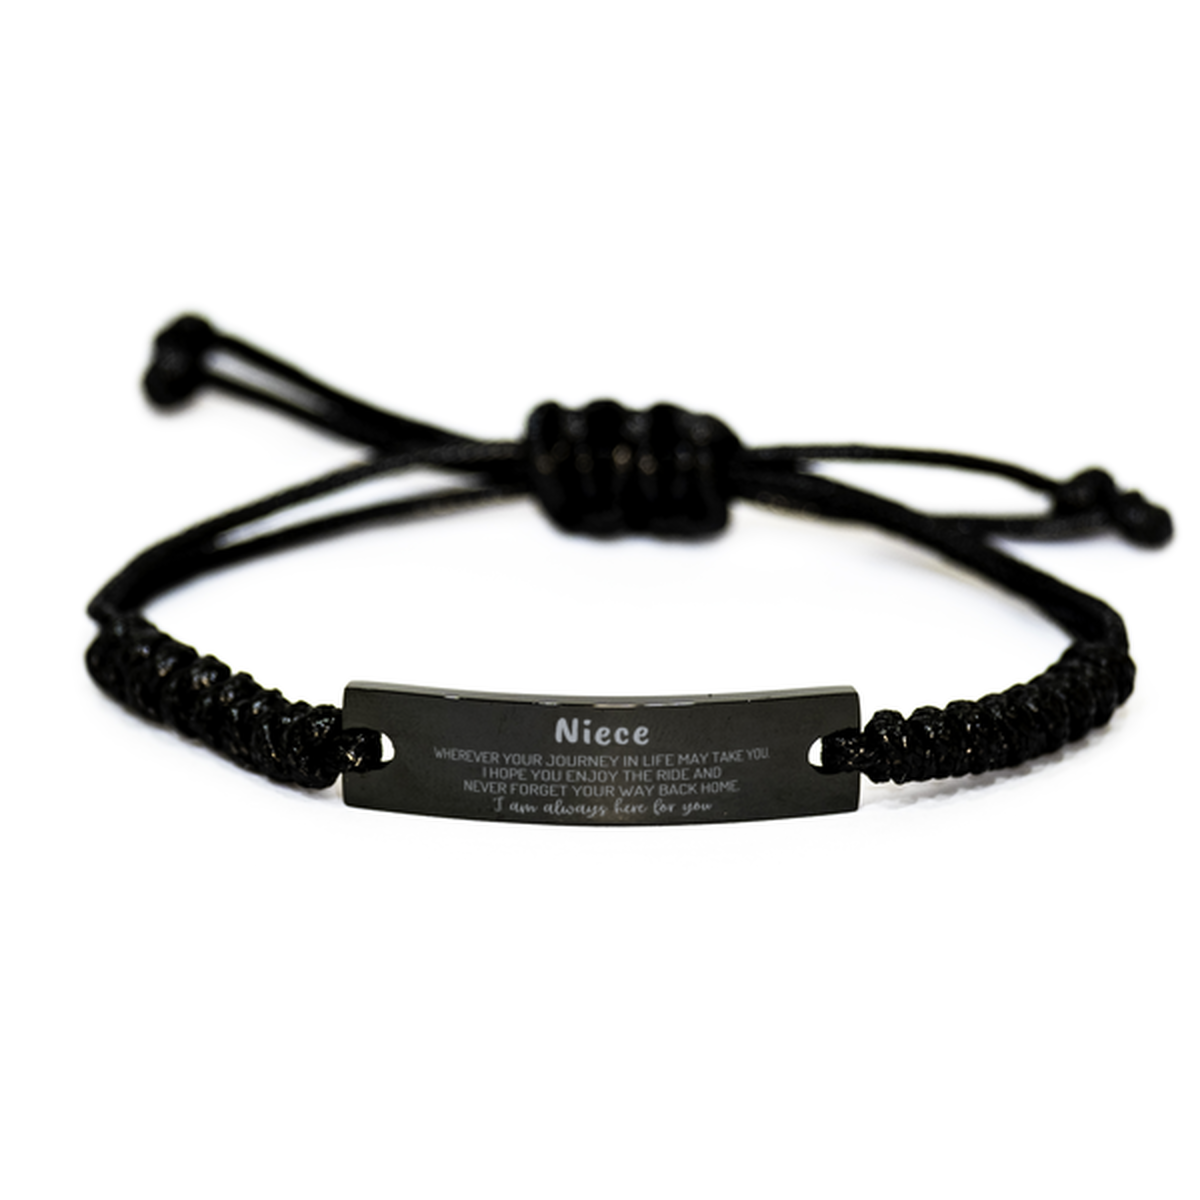 Niece wherever your journey in life may take you, I am always here for you Niece Black Rope Bracelet, Awesome Christmas Gifts For Niece, Niece Birthday Gifts for Men Women Family Loved One